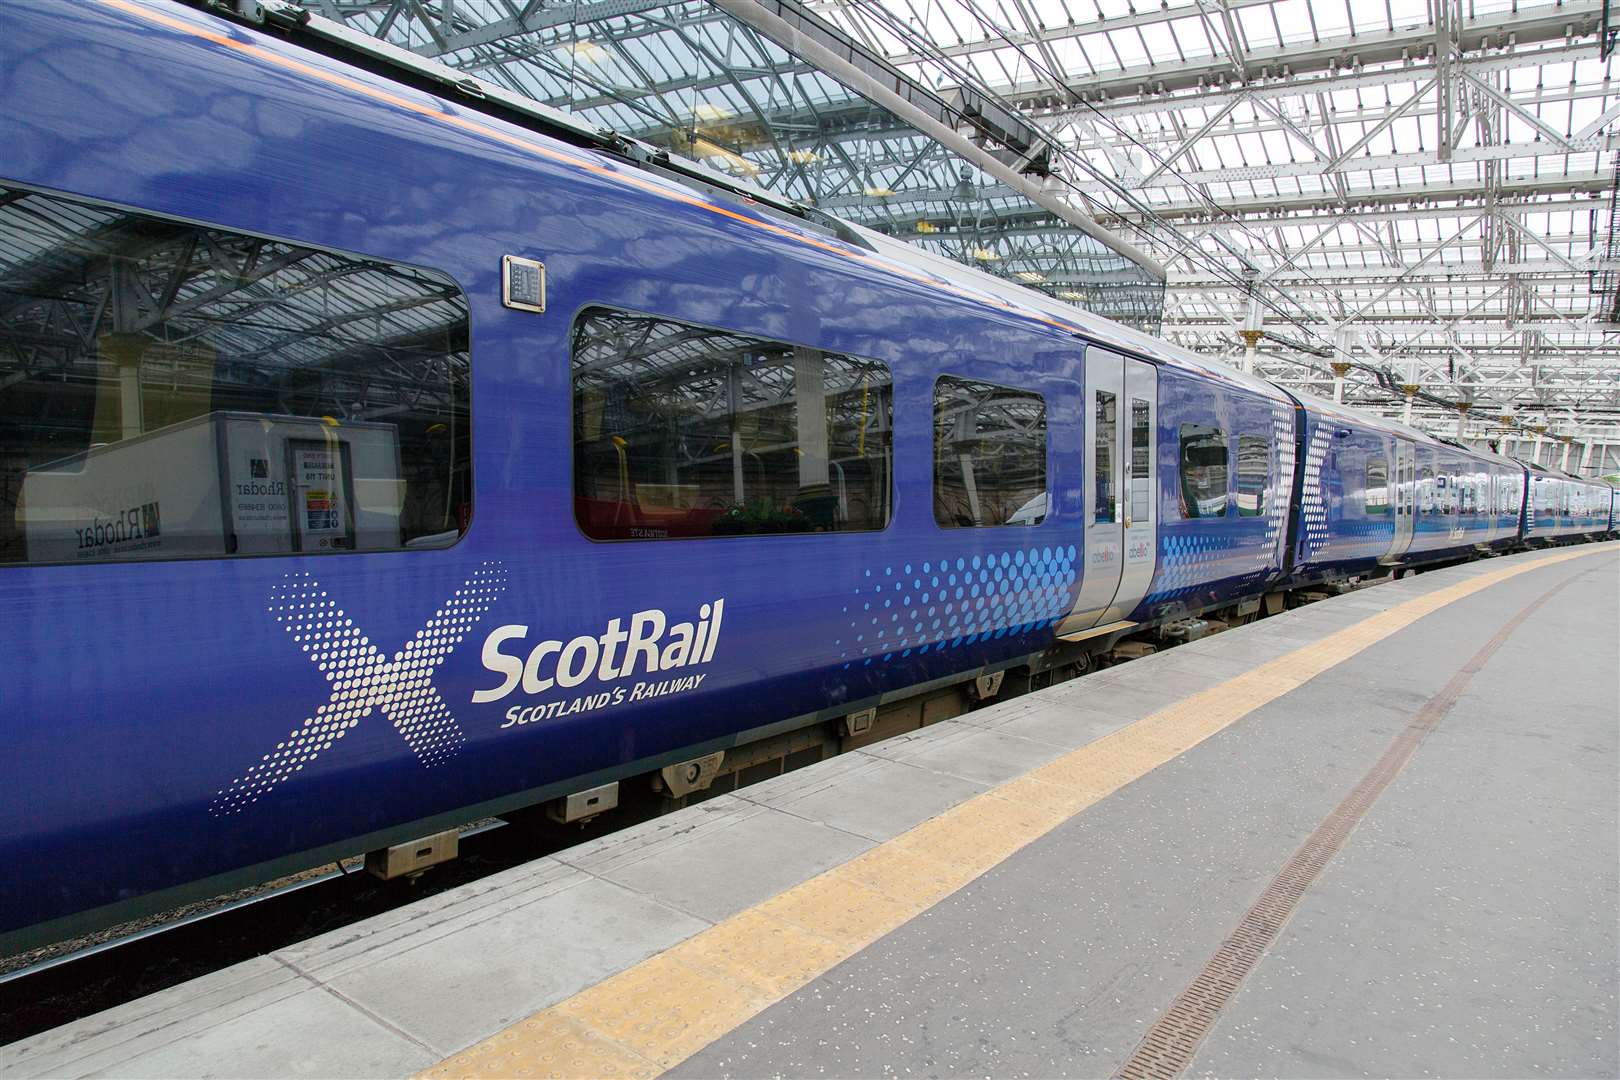 ScotRail is now run by a company owned by the Scottish Government.